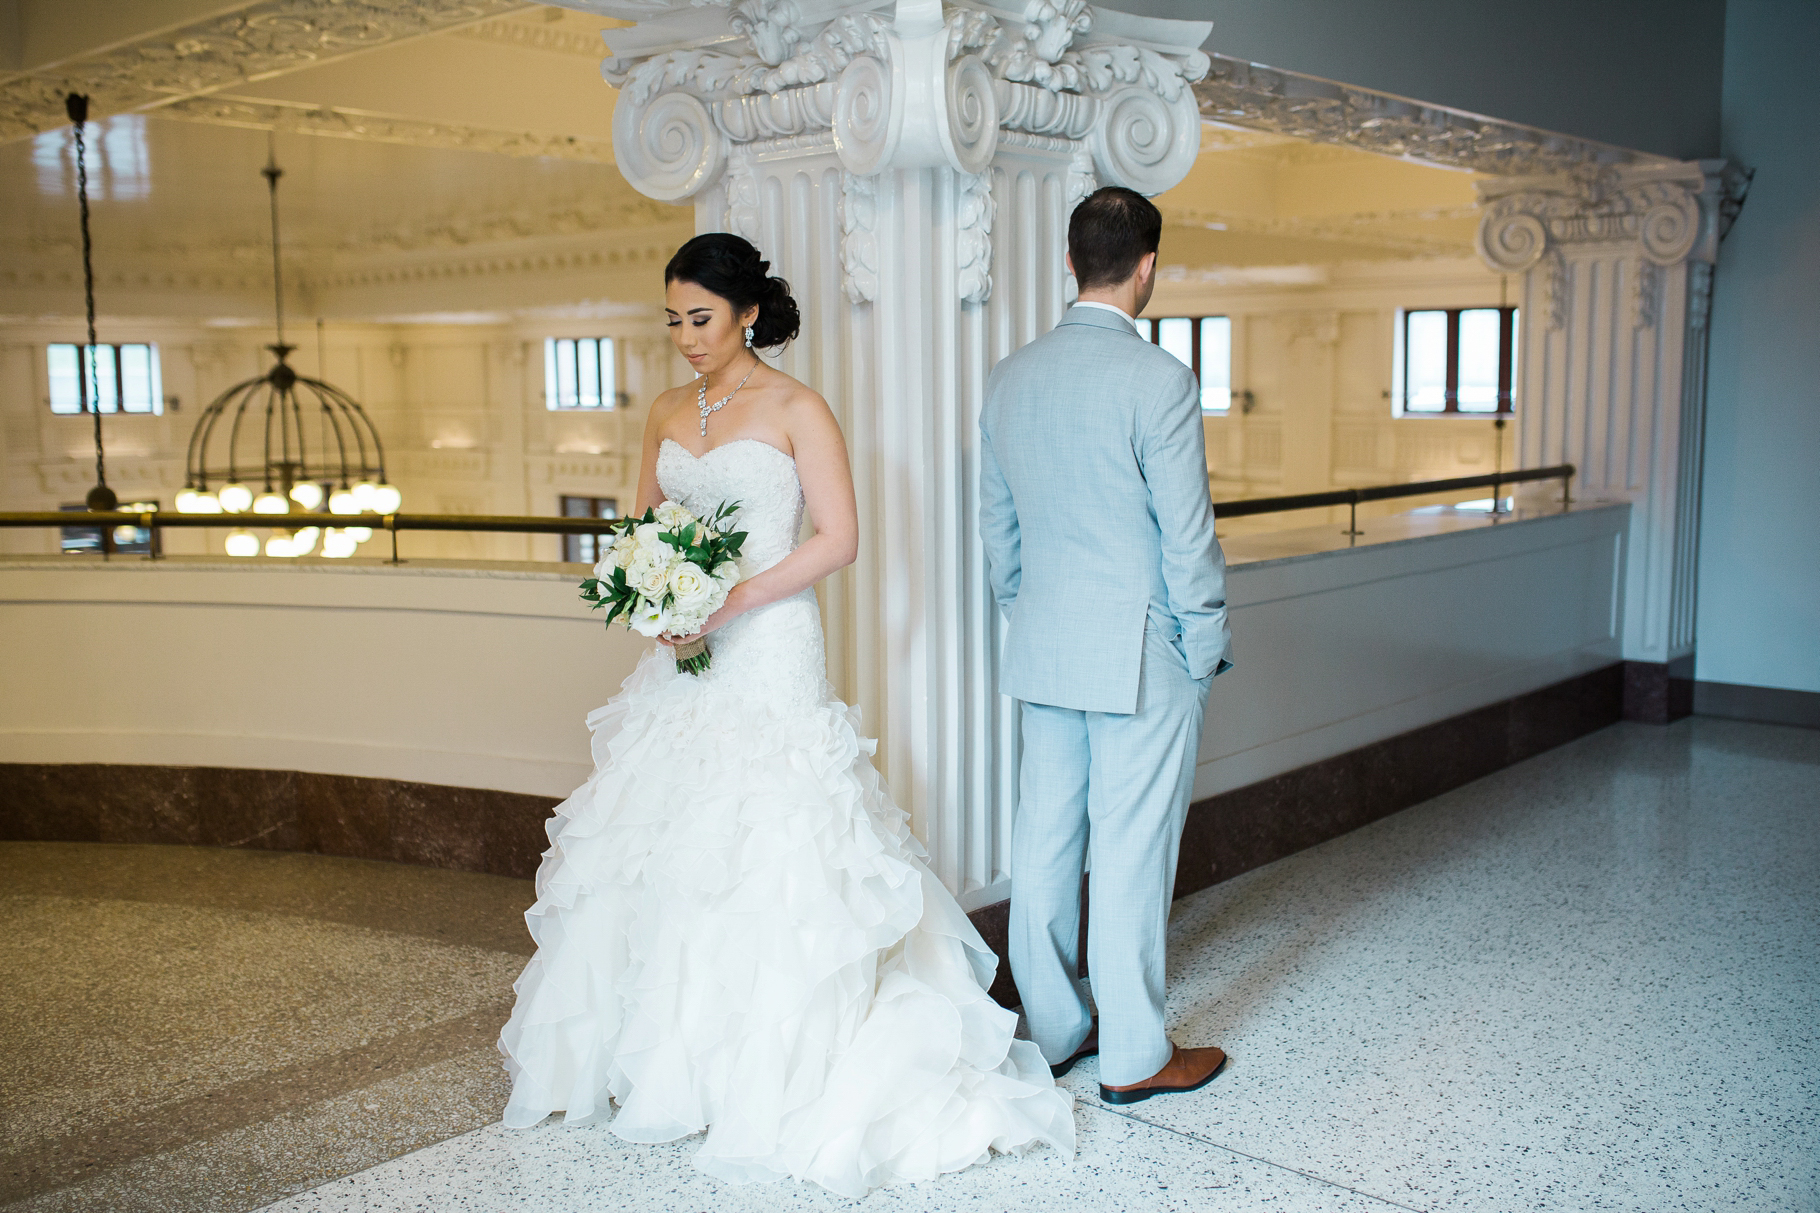 6-King-Street-Station-Pioneer-Square-First-Look-Portraits-Pacific-Tower-Seattle-Wedding-Photographer-Photography-by-Betty-Elaine